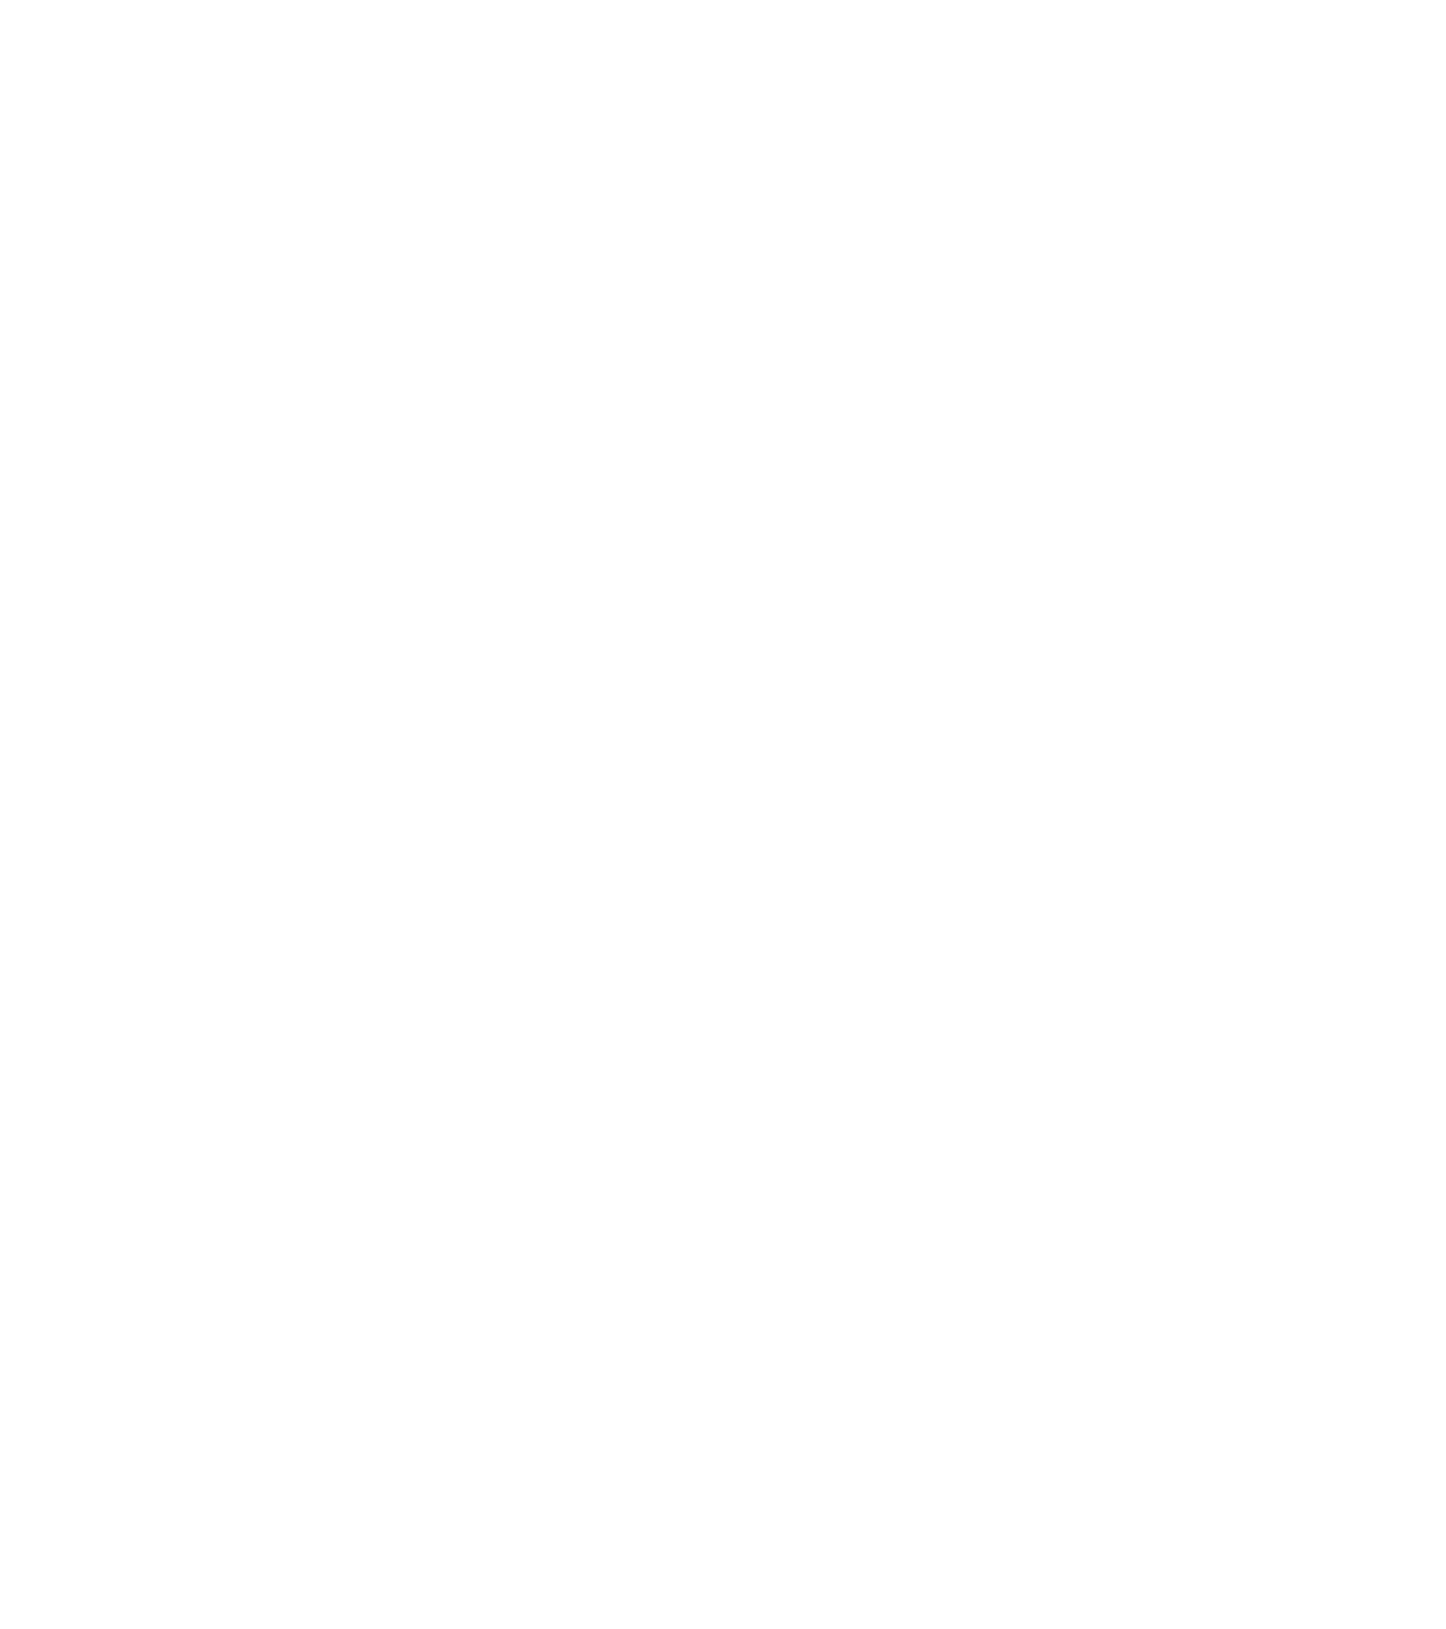 Why We Give